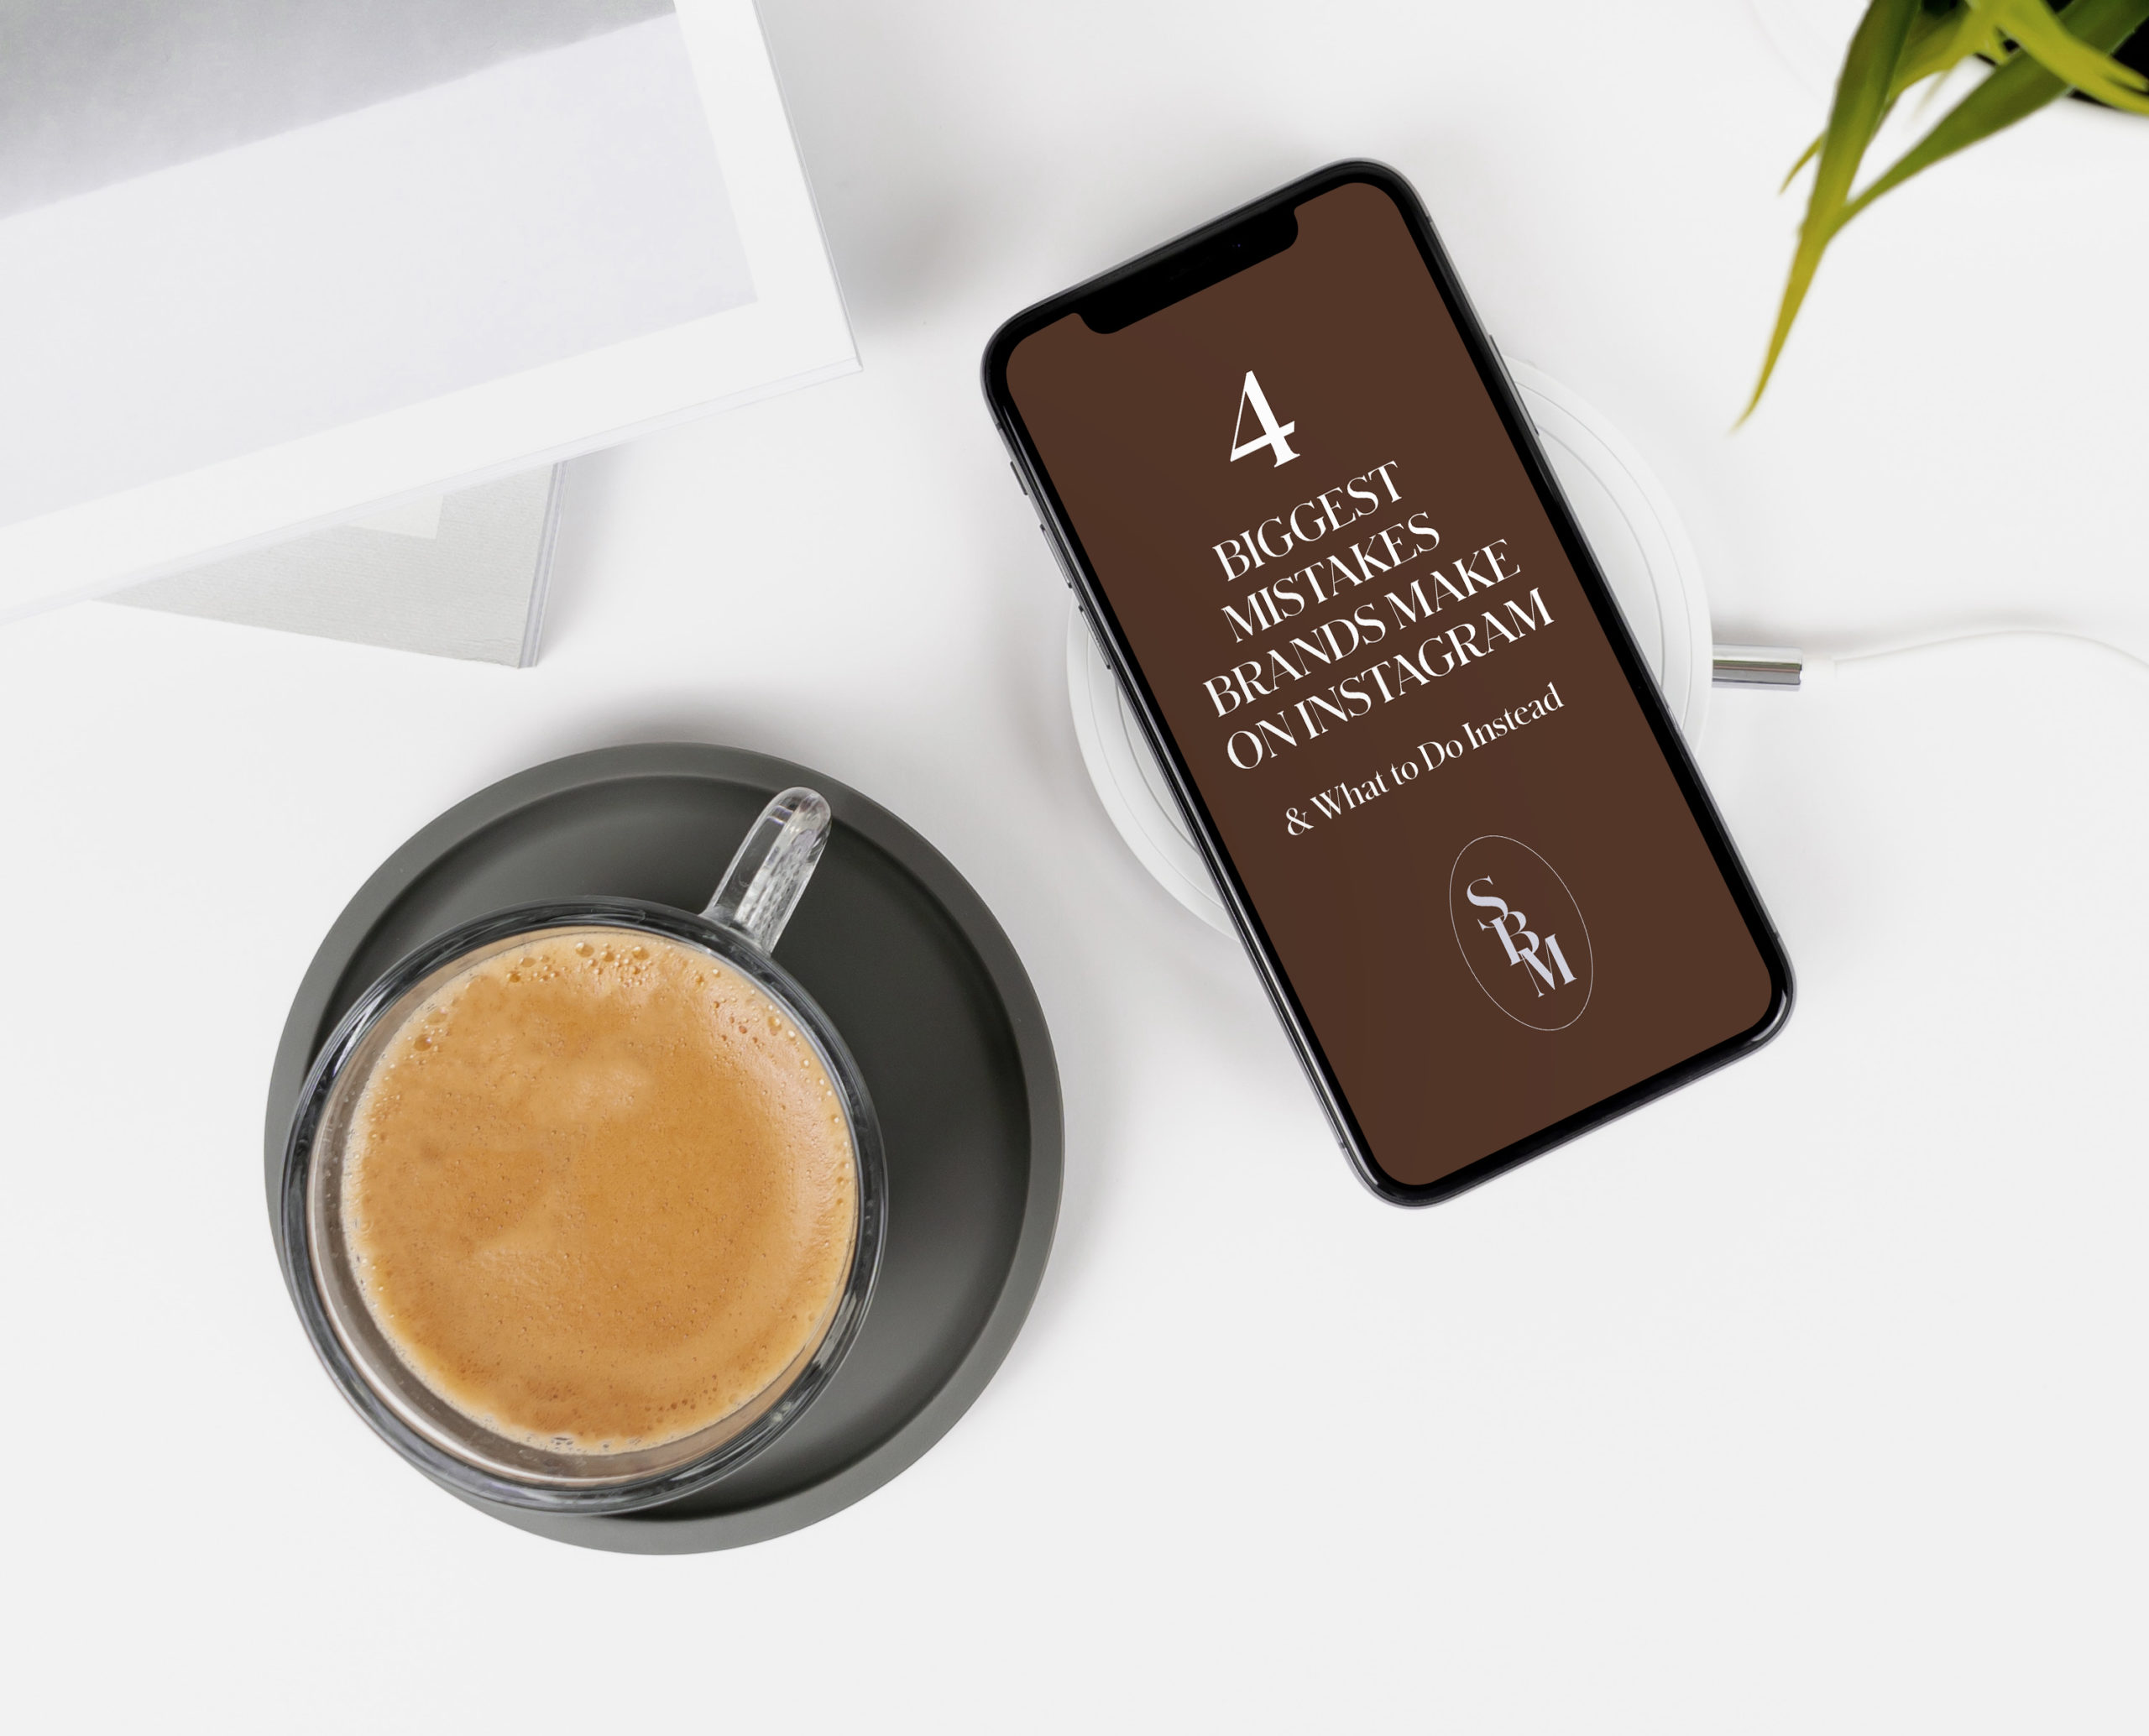 Social Bean Media Blog 4 Biggest Mistakes Brands Make on Instagram and What to Do Instead, Iphone X on Desk with title and black coffee cup on clean background